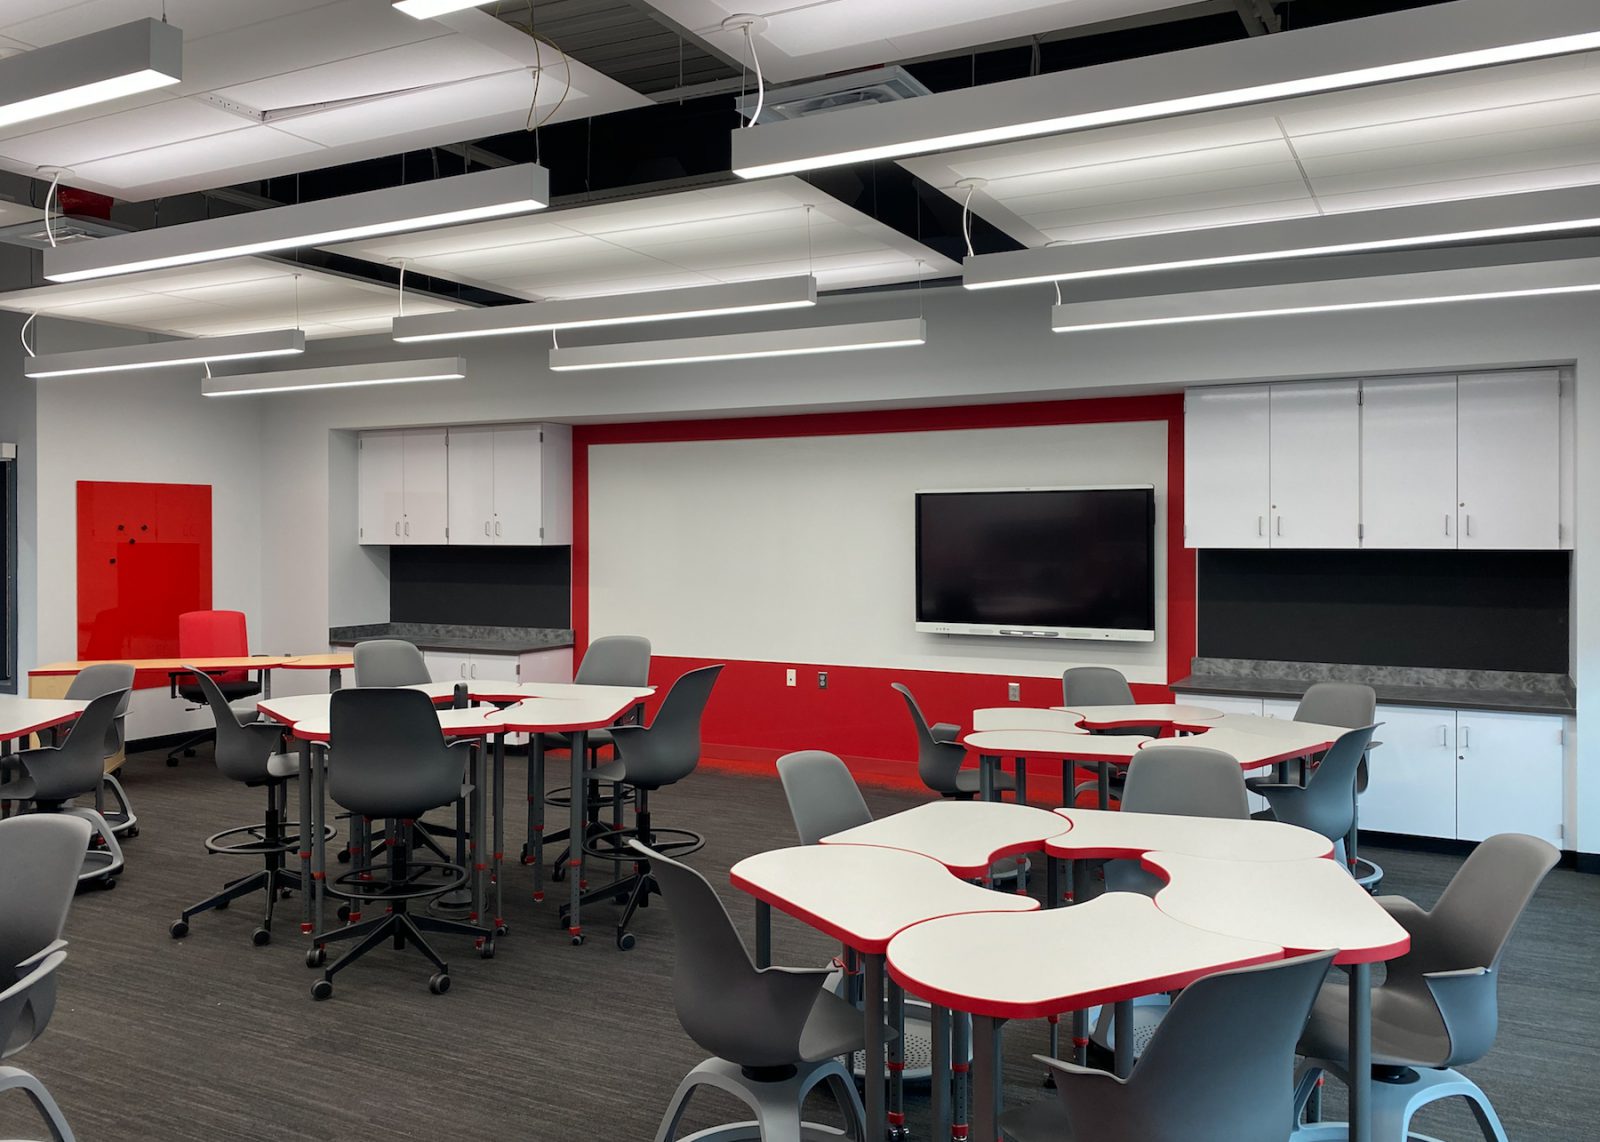 Example of a modern classroom that is colorful with flexible furniture and modern technology